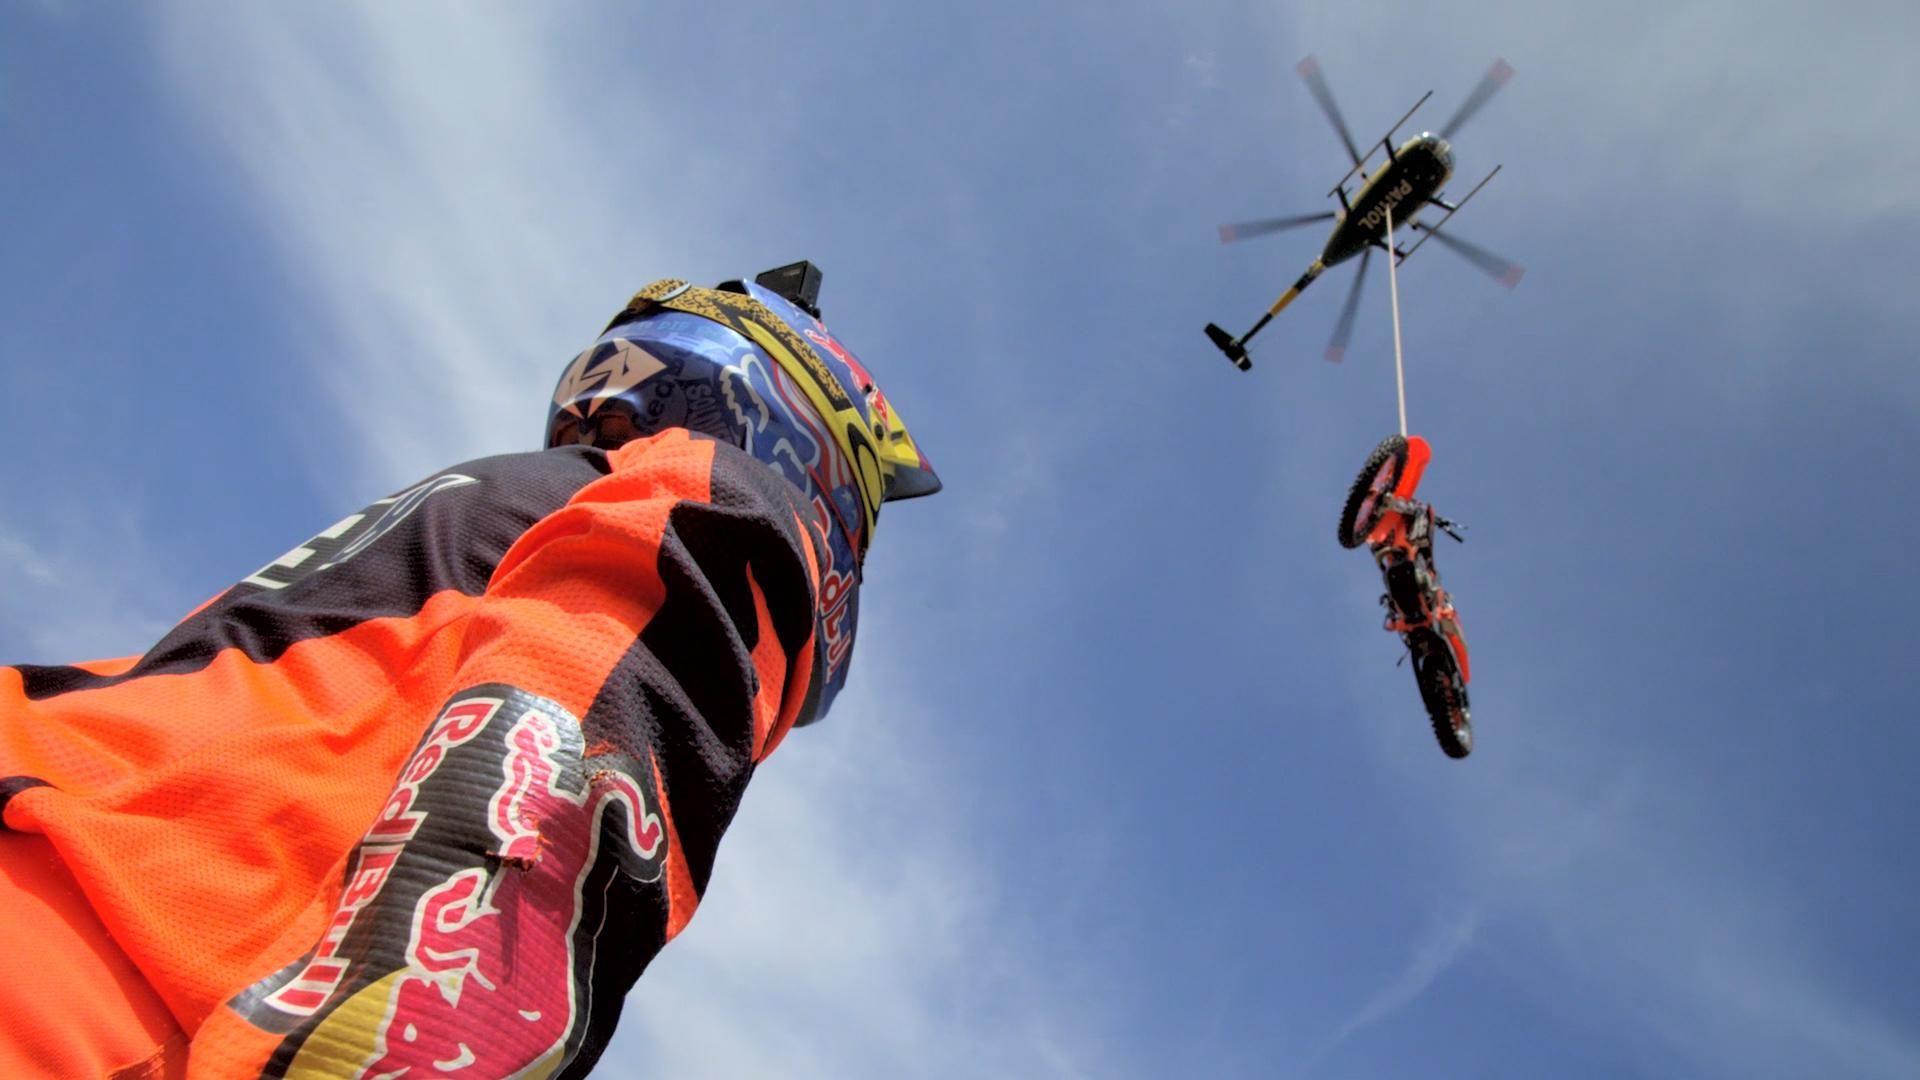 ESPN X Games to Host First-Ever Real Moto Video Competition - ESPN Press  Room U.S.